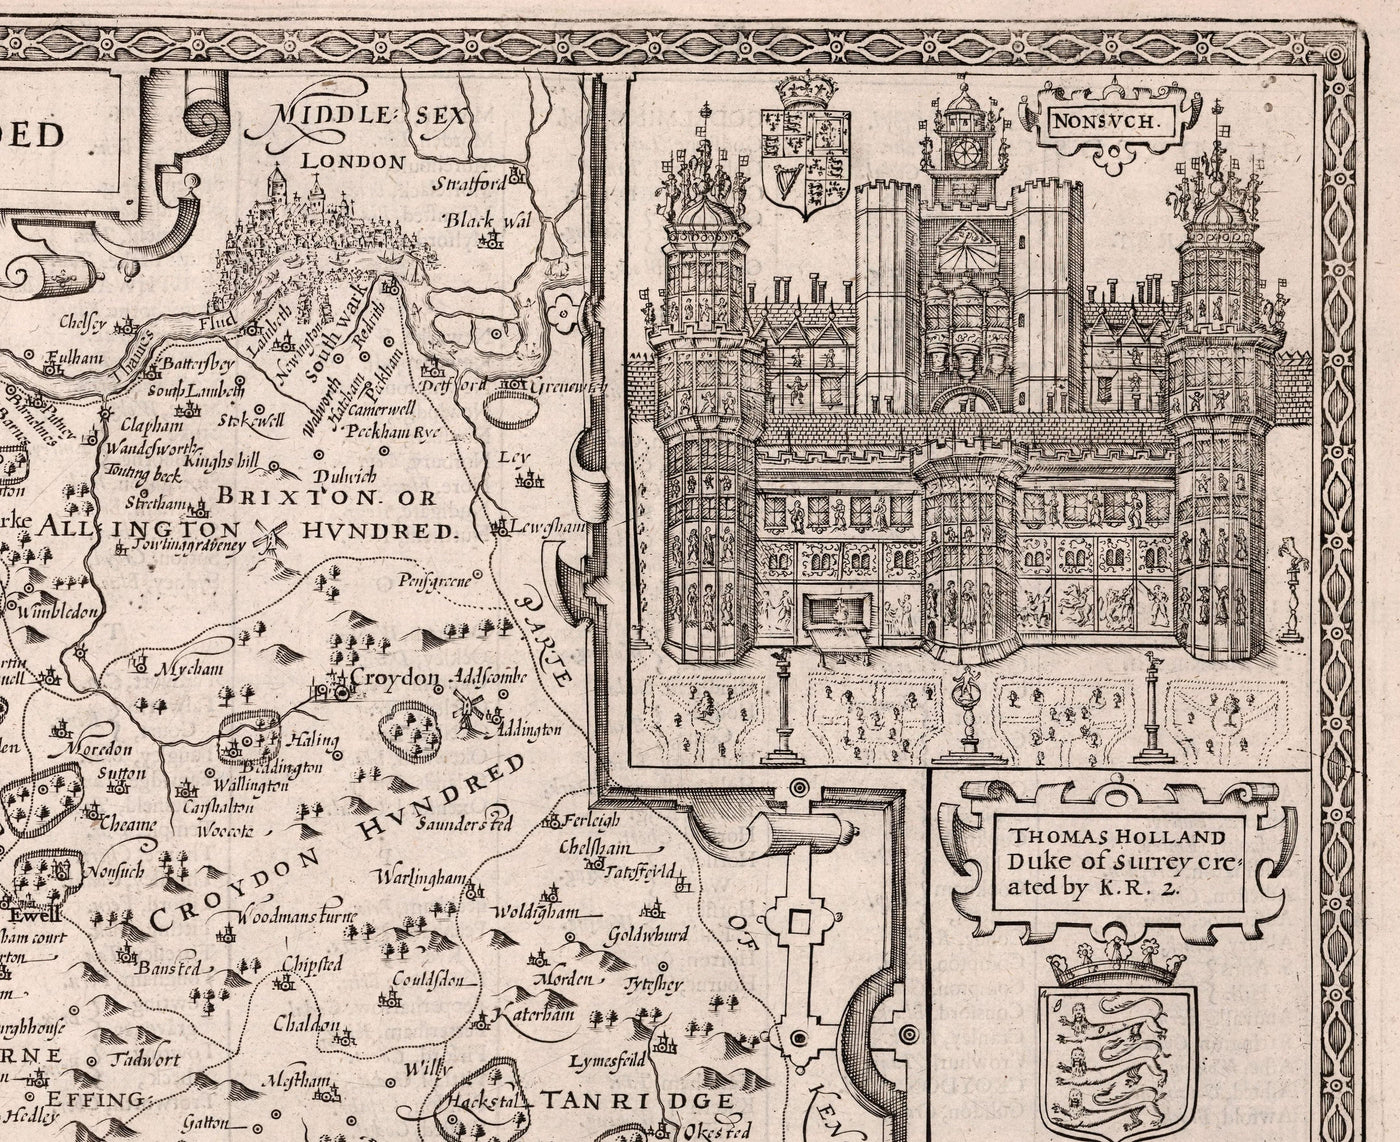 Old Map of Surrey in 1611 by John Speed - Woking, Guildford, Croydon, Richmond, London